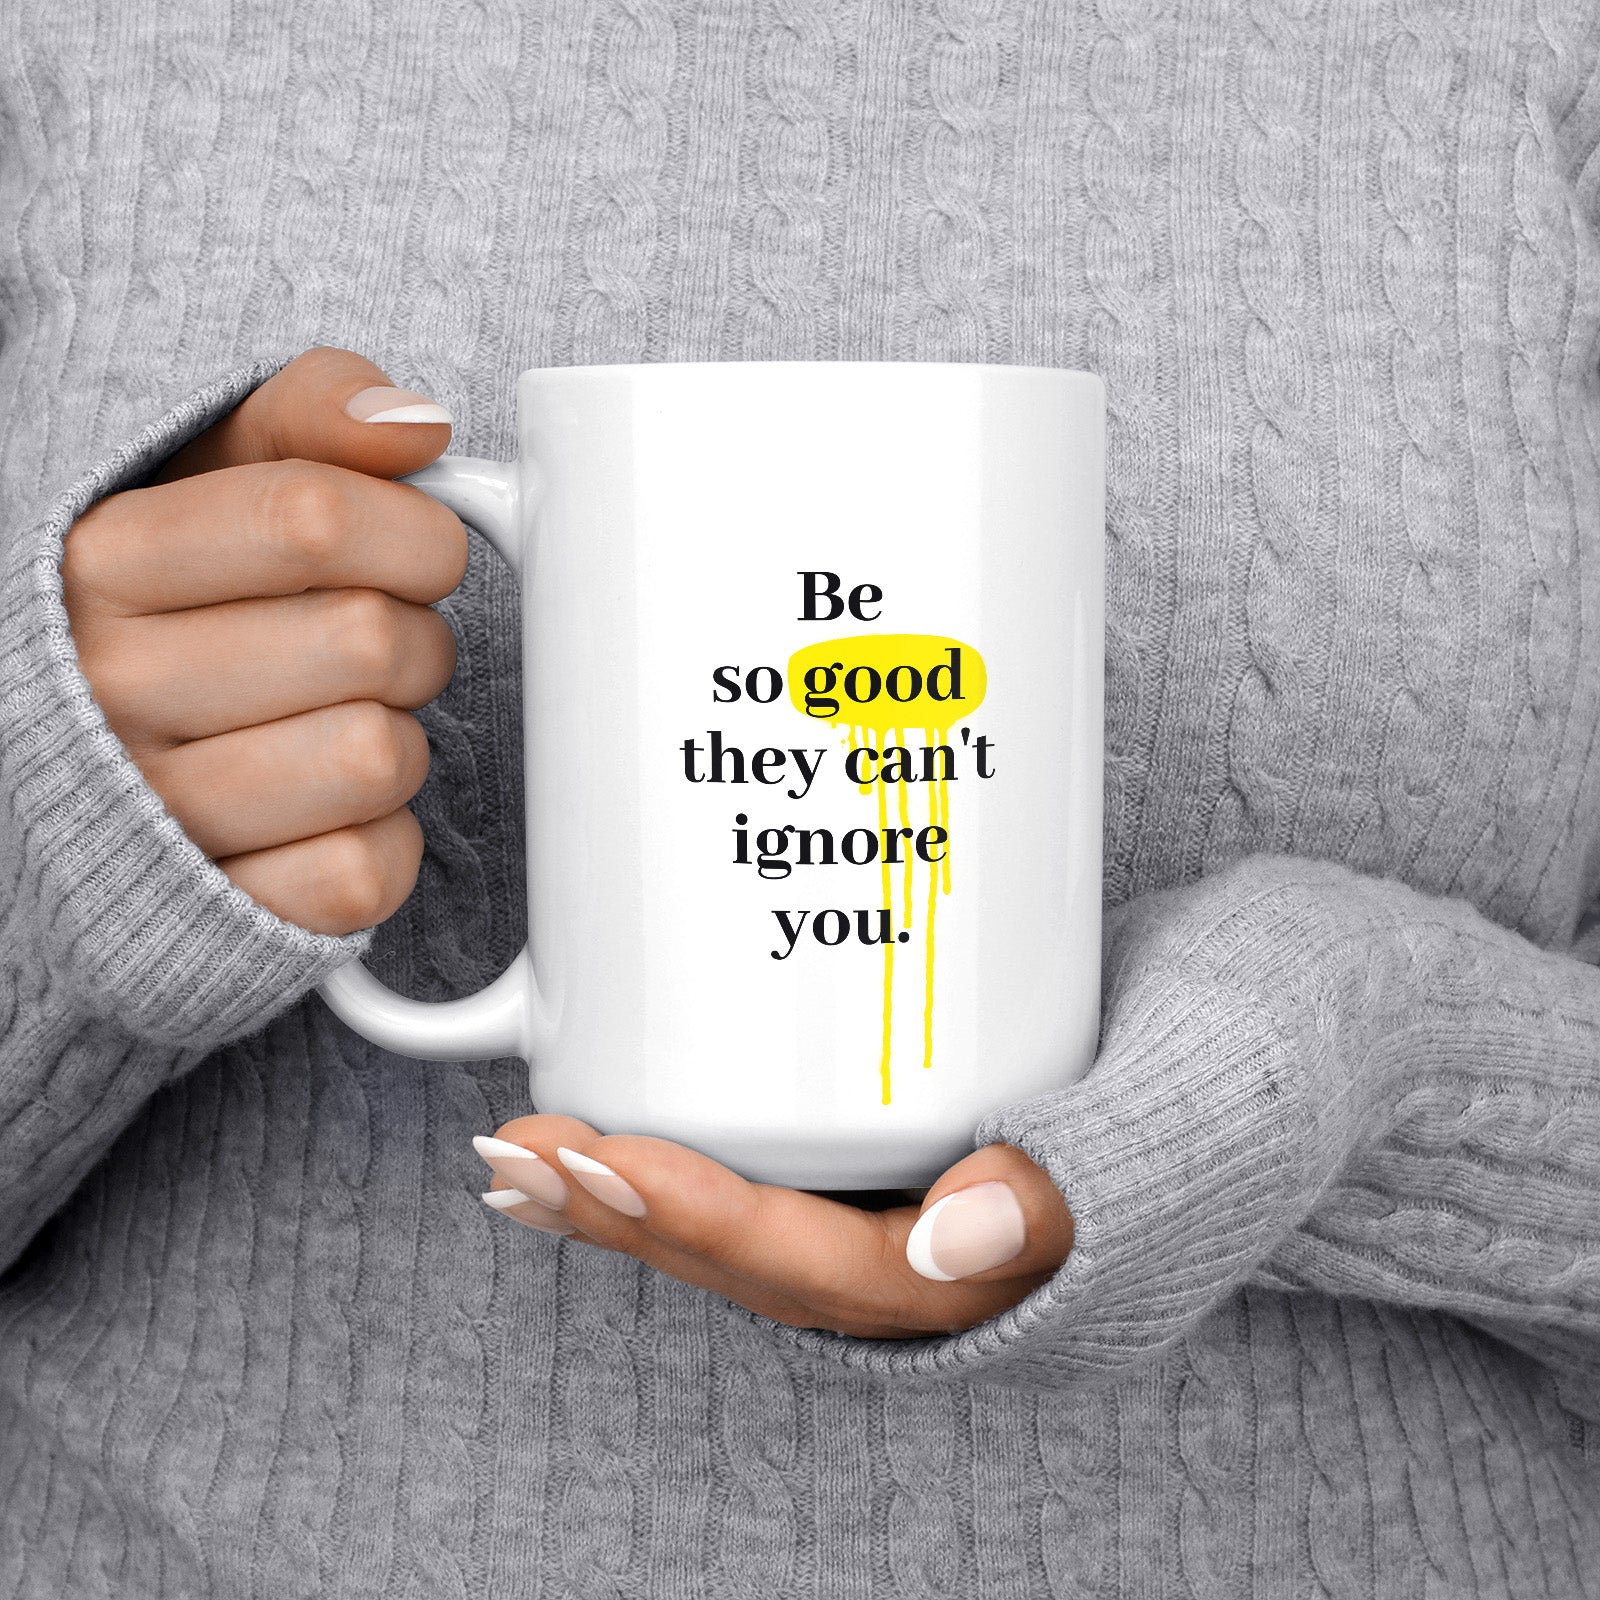 Be inspired by Steve Martin's famous quote, "Be so good they can't ignore you" on this white and glossy 15oz coffee mug with the handle on the left.